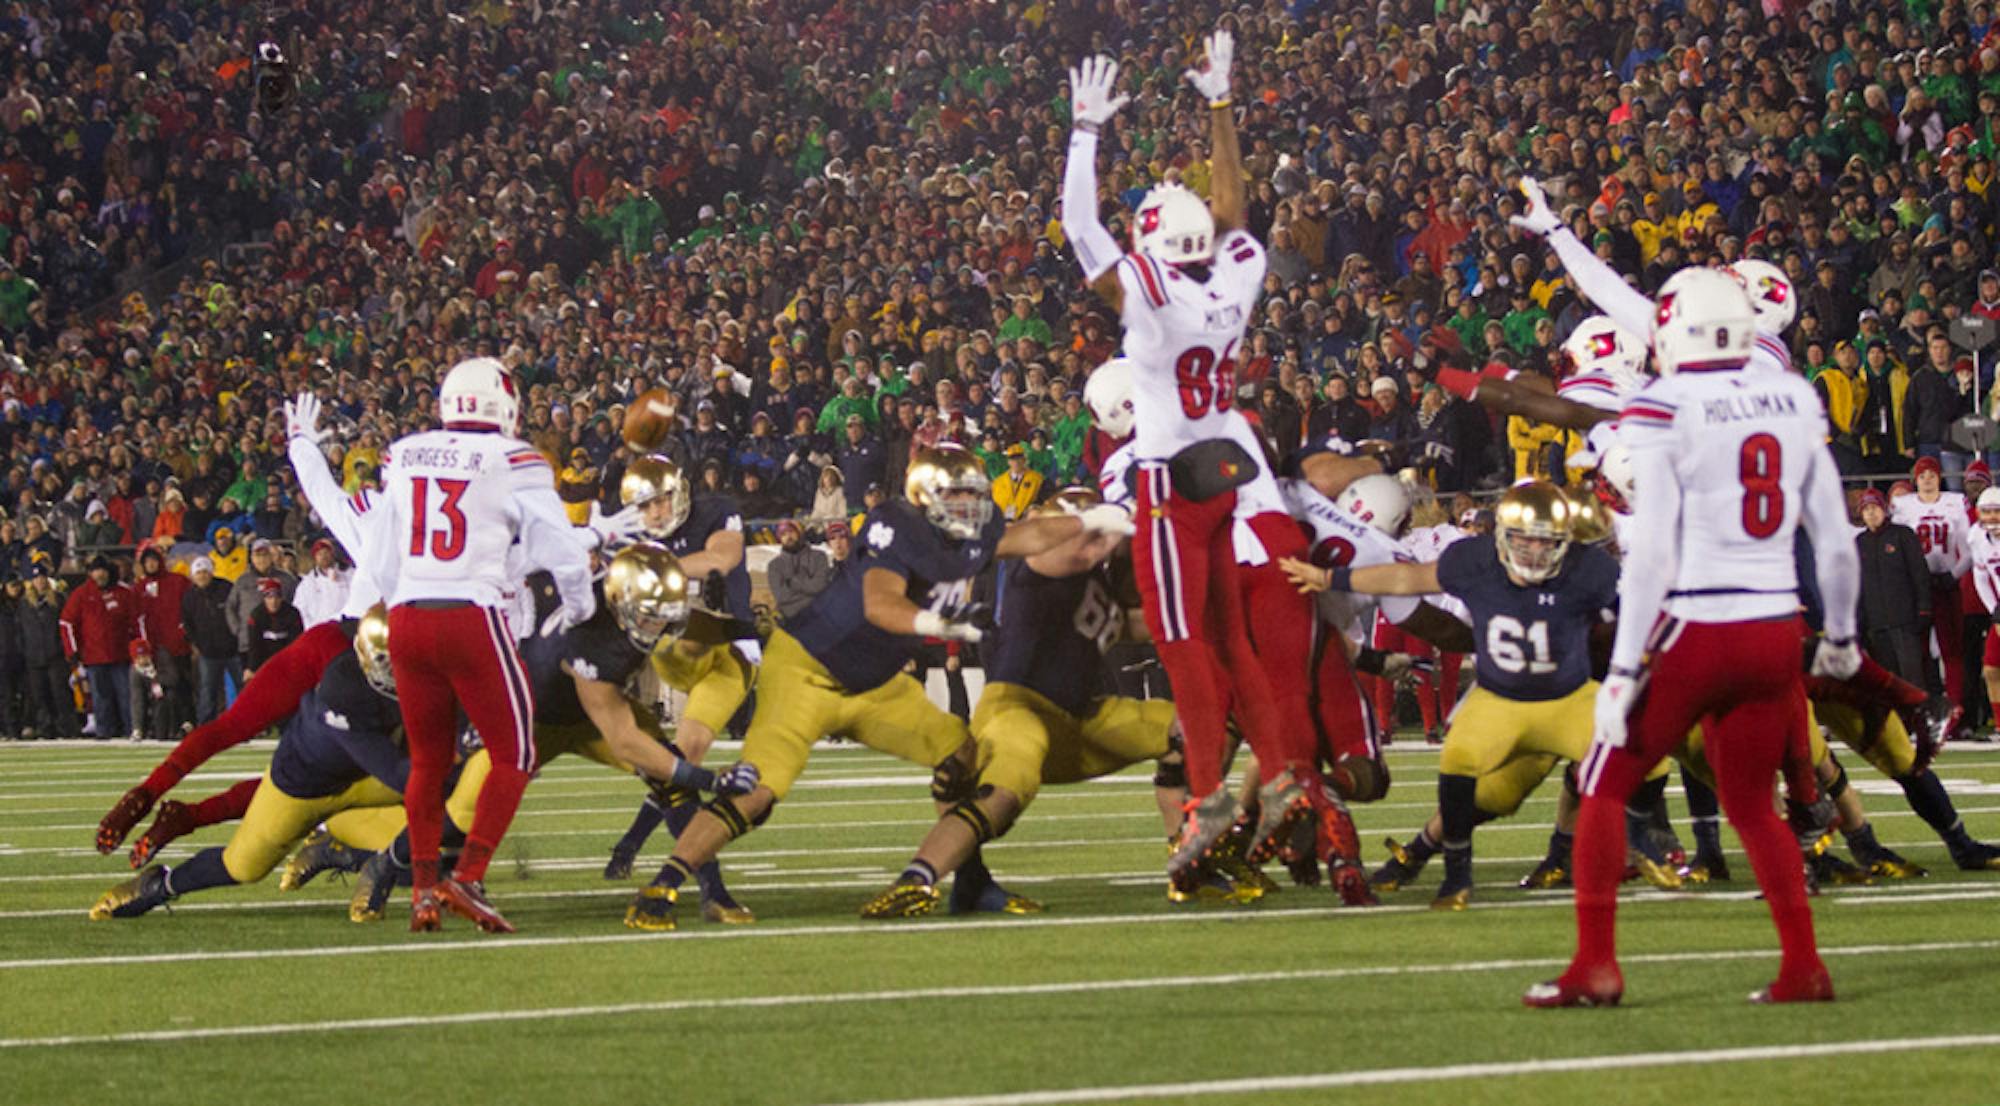 Irish senior kicker Kyle Brindza misses a 32-yard field goal in the final minute of regulation Saturday during Notre Dame’s 31-28 loss to Louisville at Notre Dame Stadium.